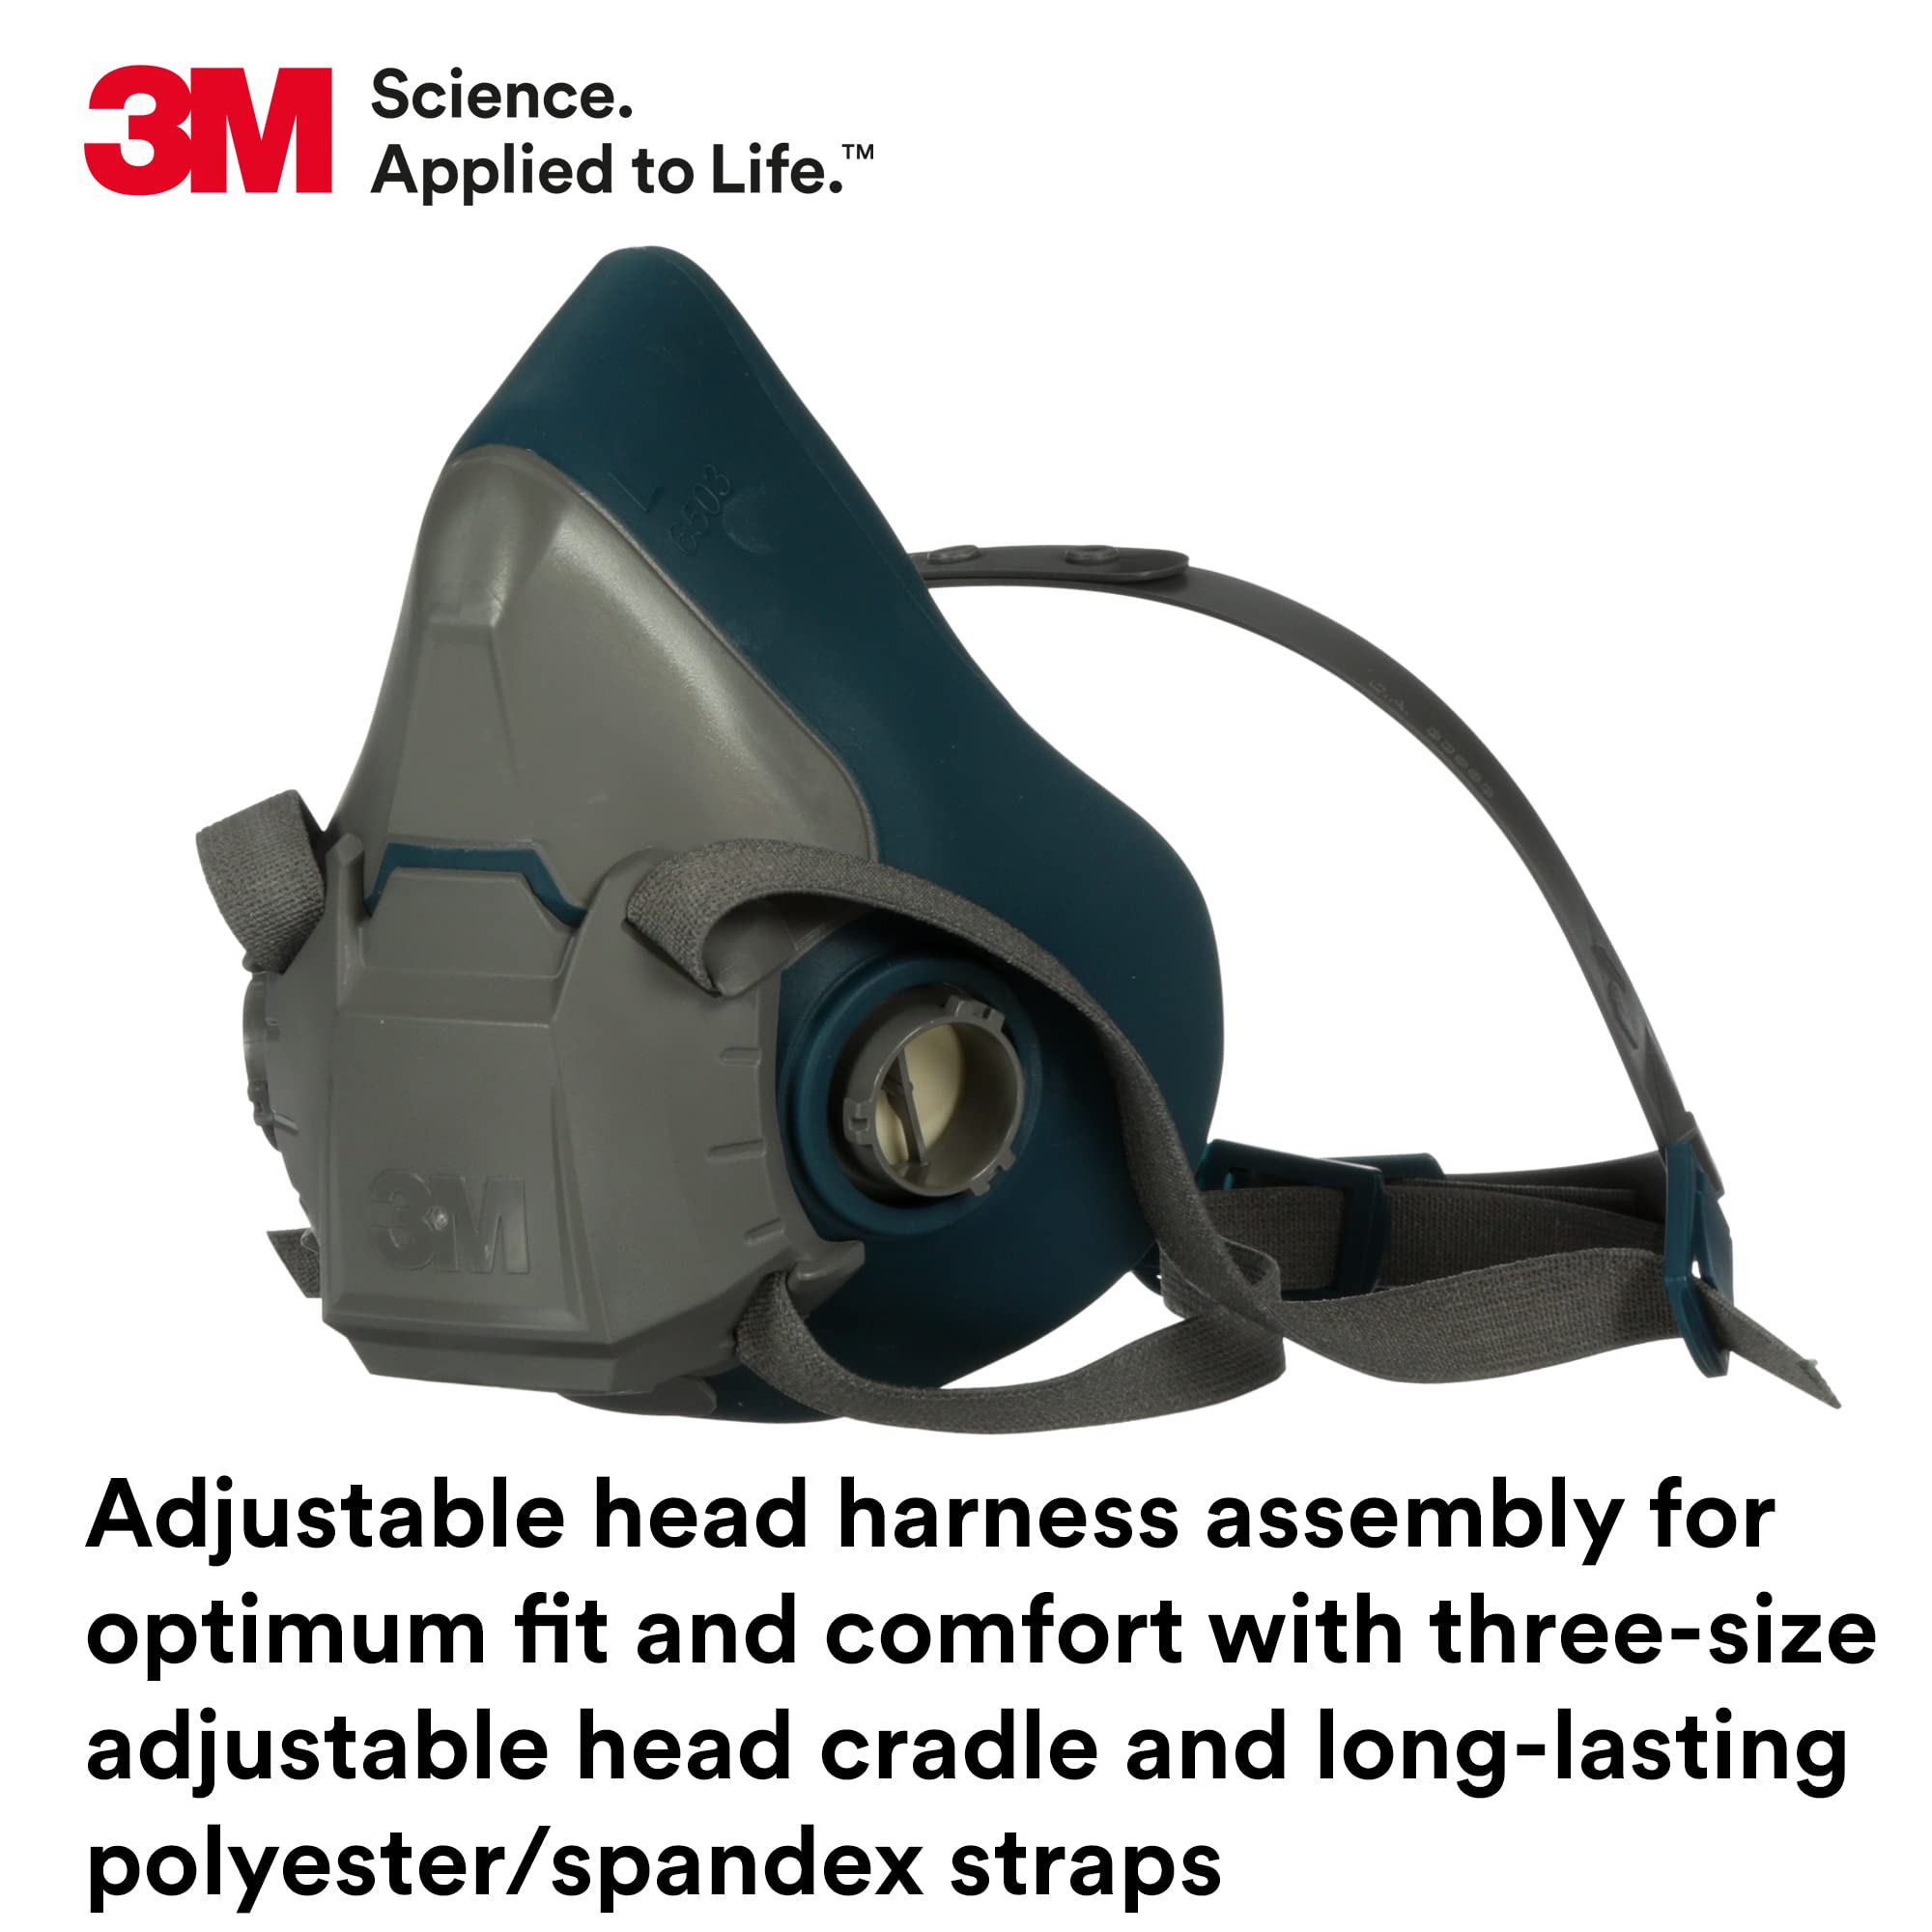 3M Rugged Comfort Half Facepiece Reusable Respirator 6501, Cool Flow Valve Helps Reduce Heat and Moisture, Silicone Faceseal Provides a Firm Seal, Welding, Sanding, Cleaning, Grinding, Small